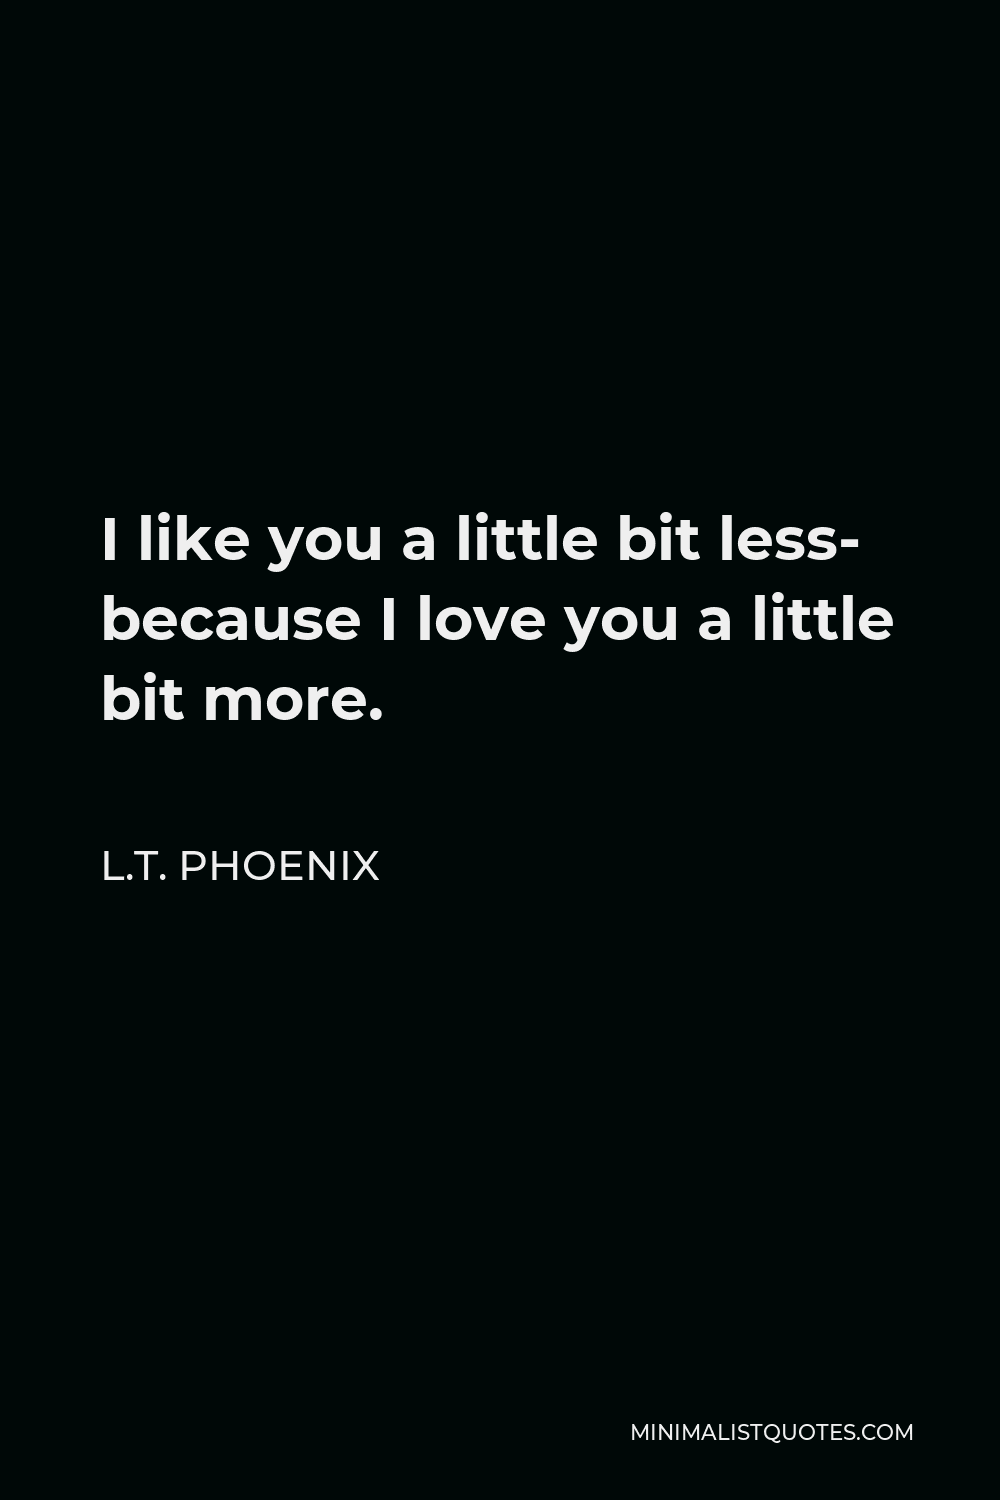 L.T. Phoenix Quote - I like you a little bit less- because I love you a little bit more.